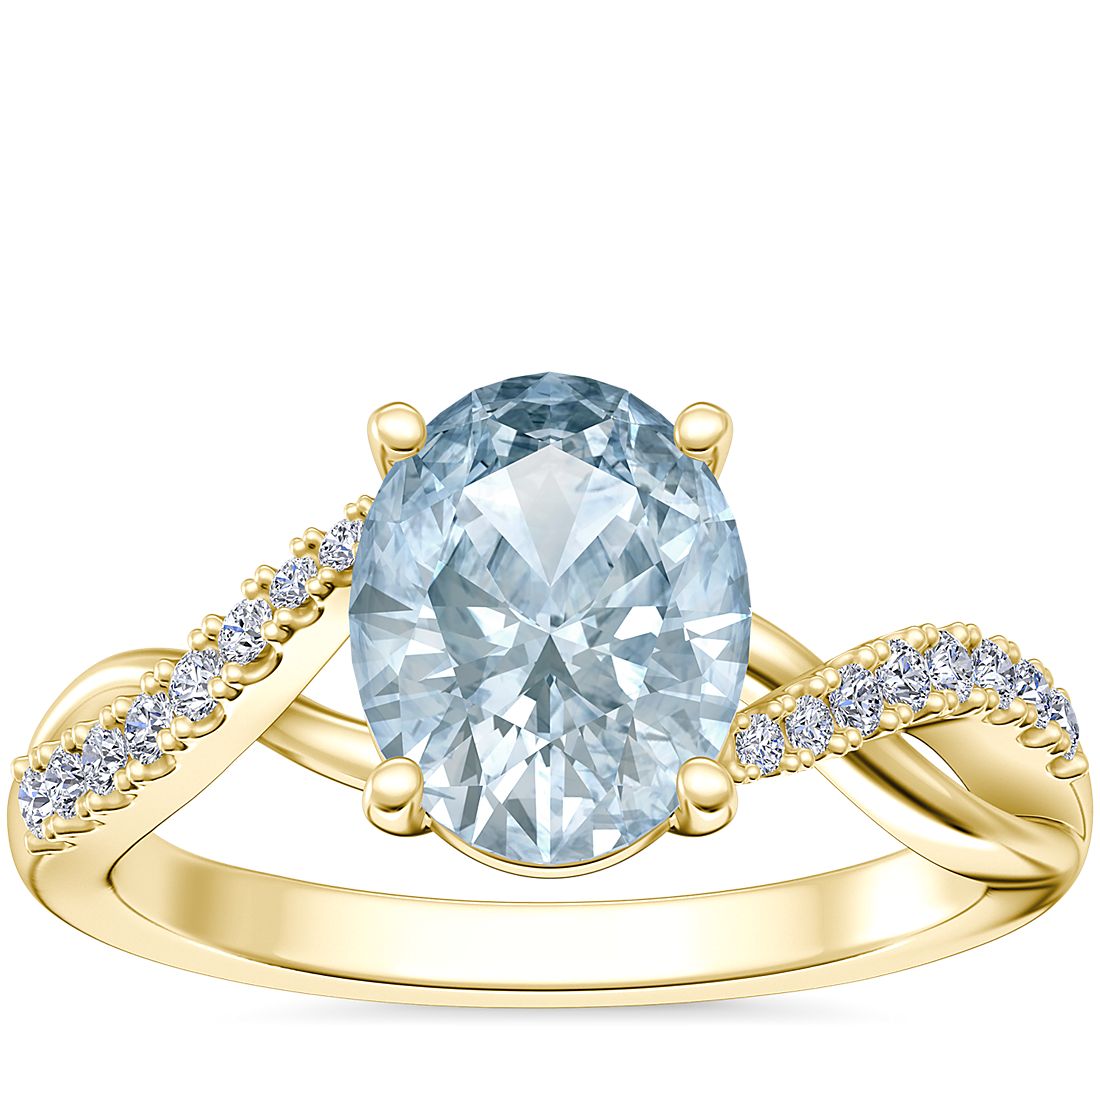 Classic Petite Twist Diamond Engagement Ring with Oval Aquamarine in 18k Yellow Gold (9x7mm)